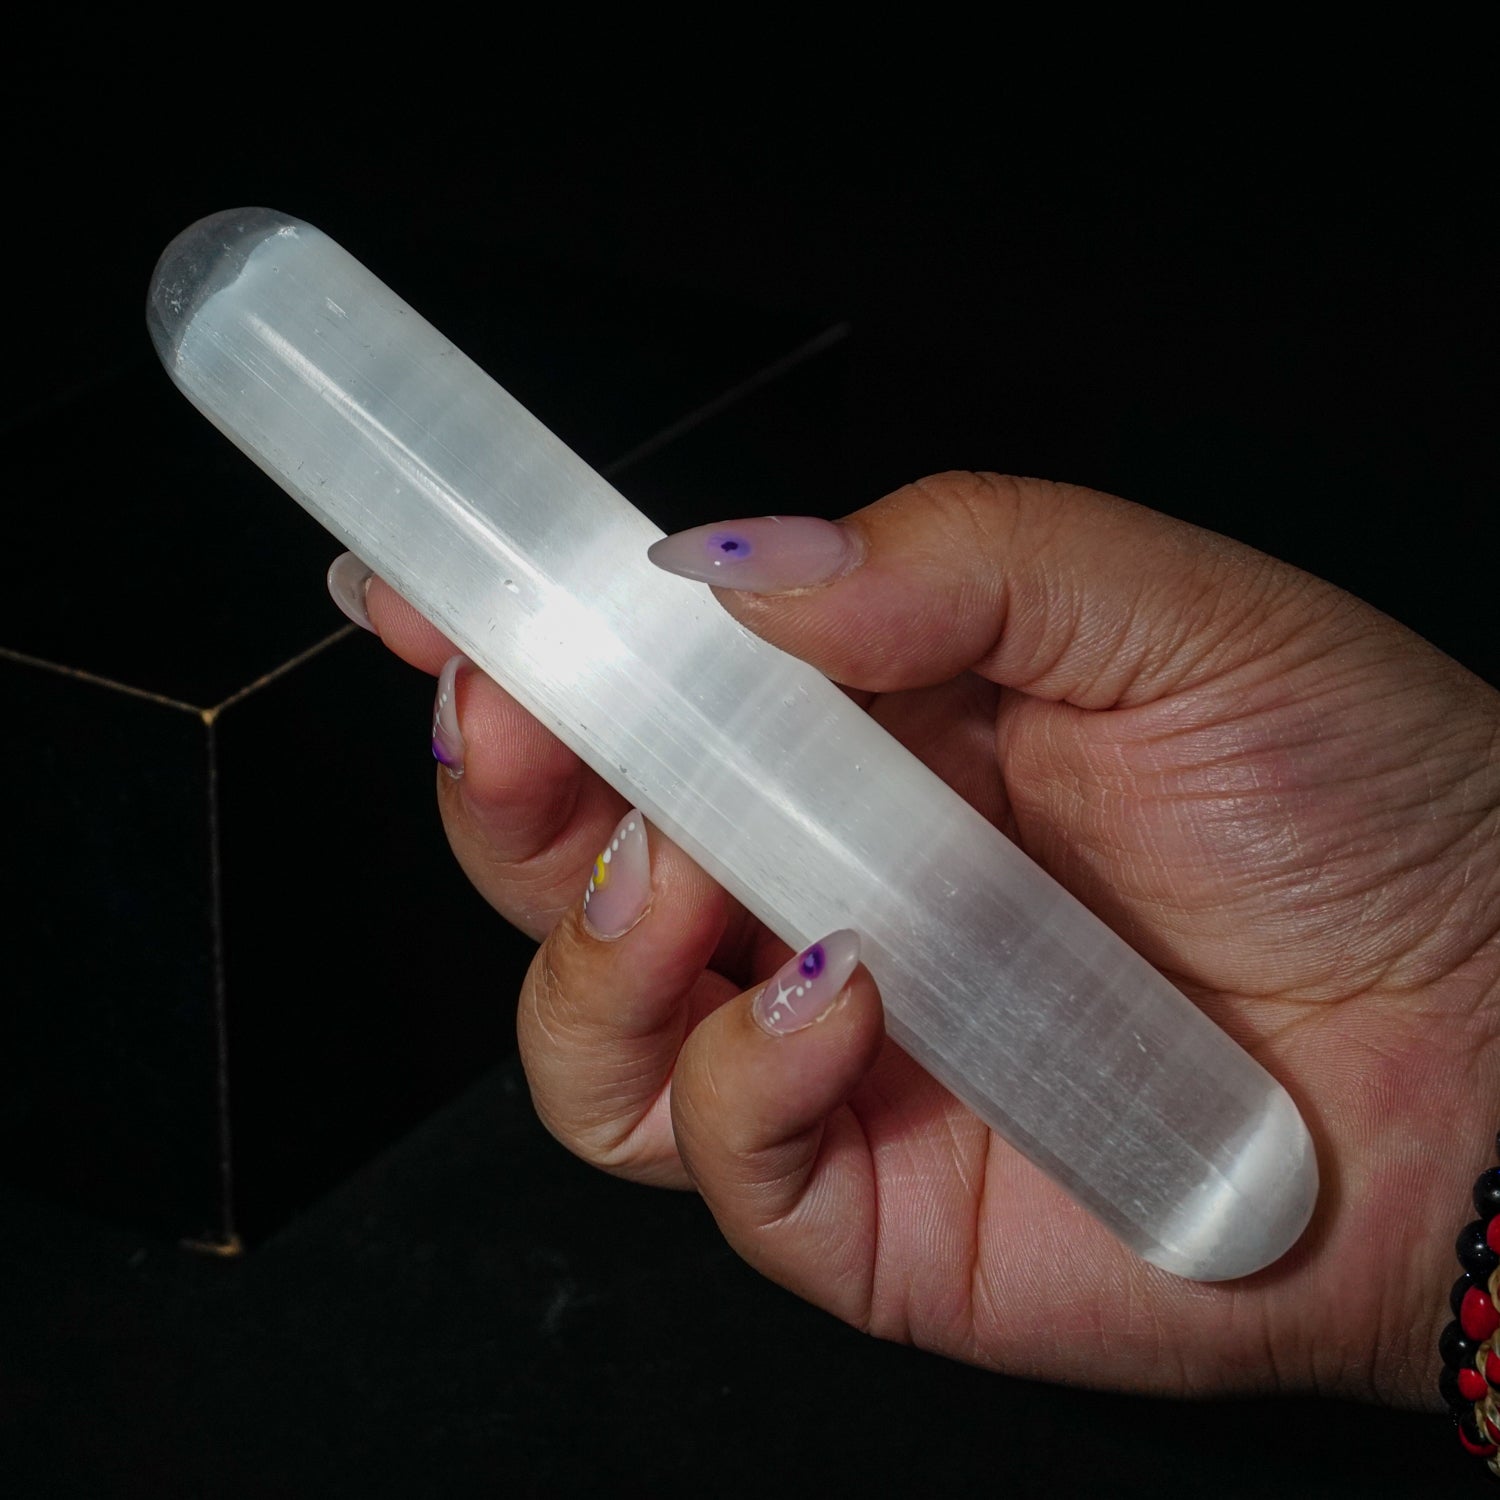 Genuine Cats-Eye Selenite Massage Wand from Morocco (142 grams)